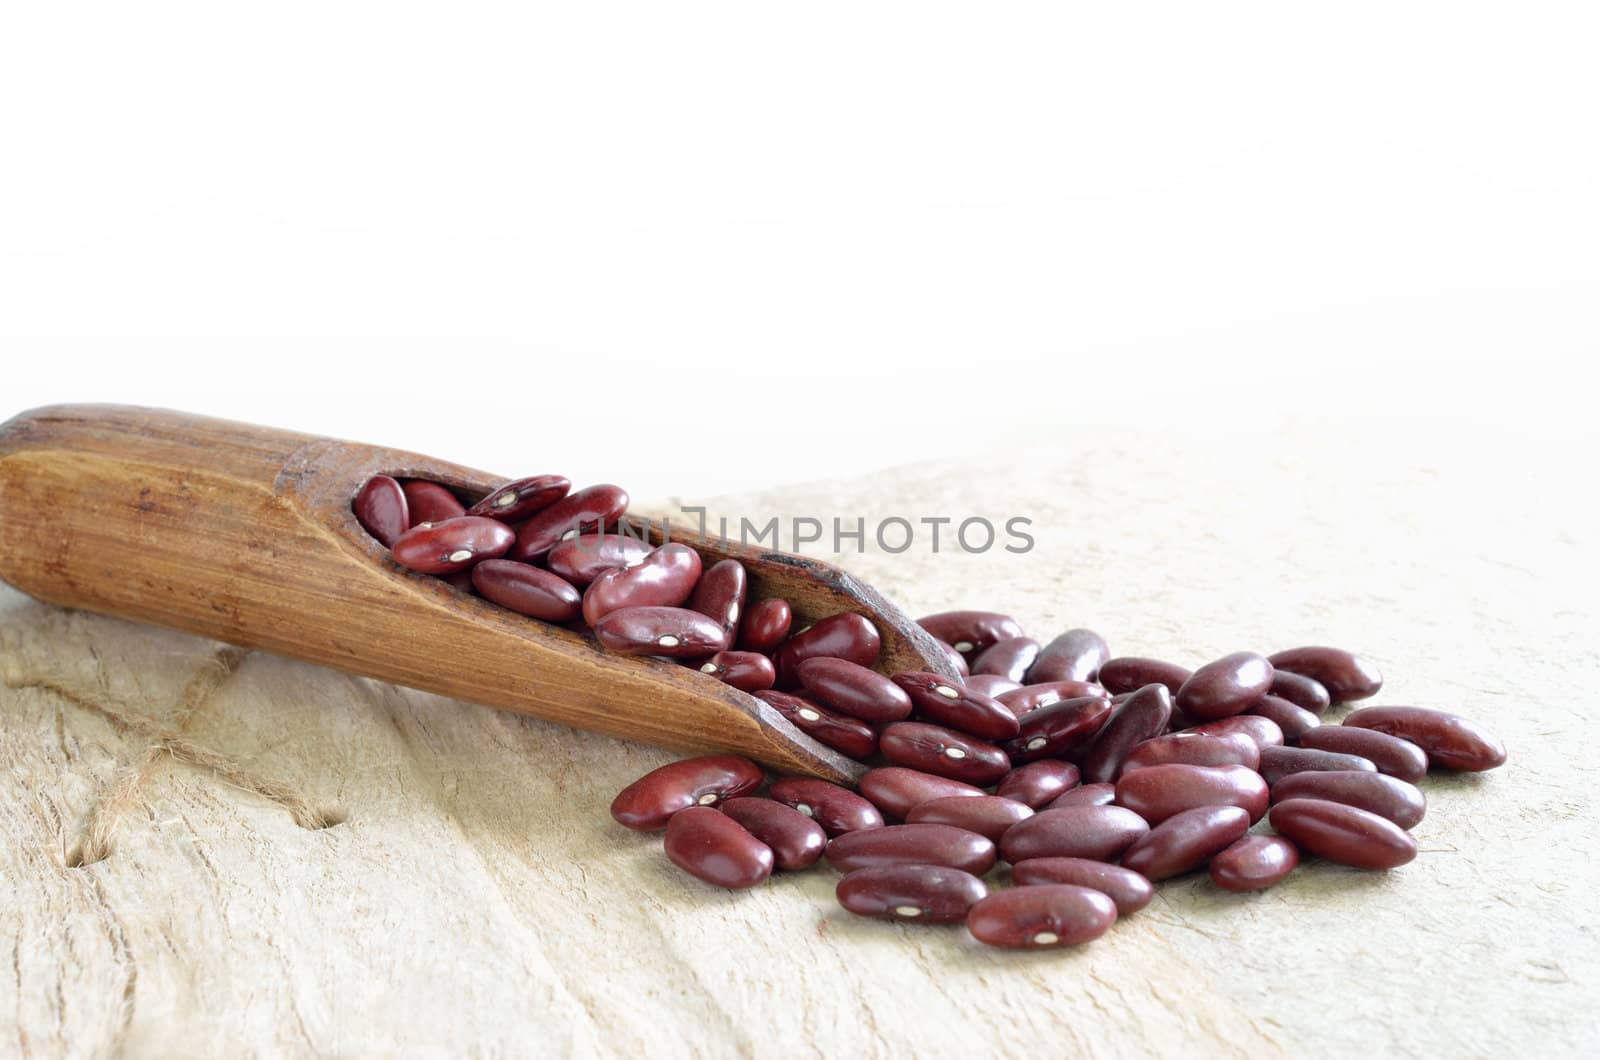 Red beans on wood